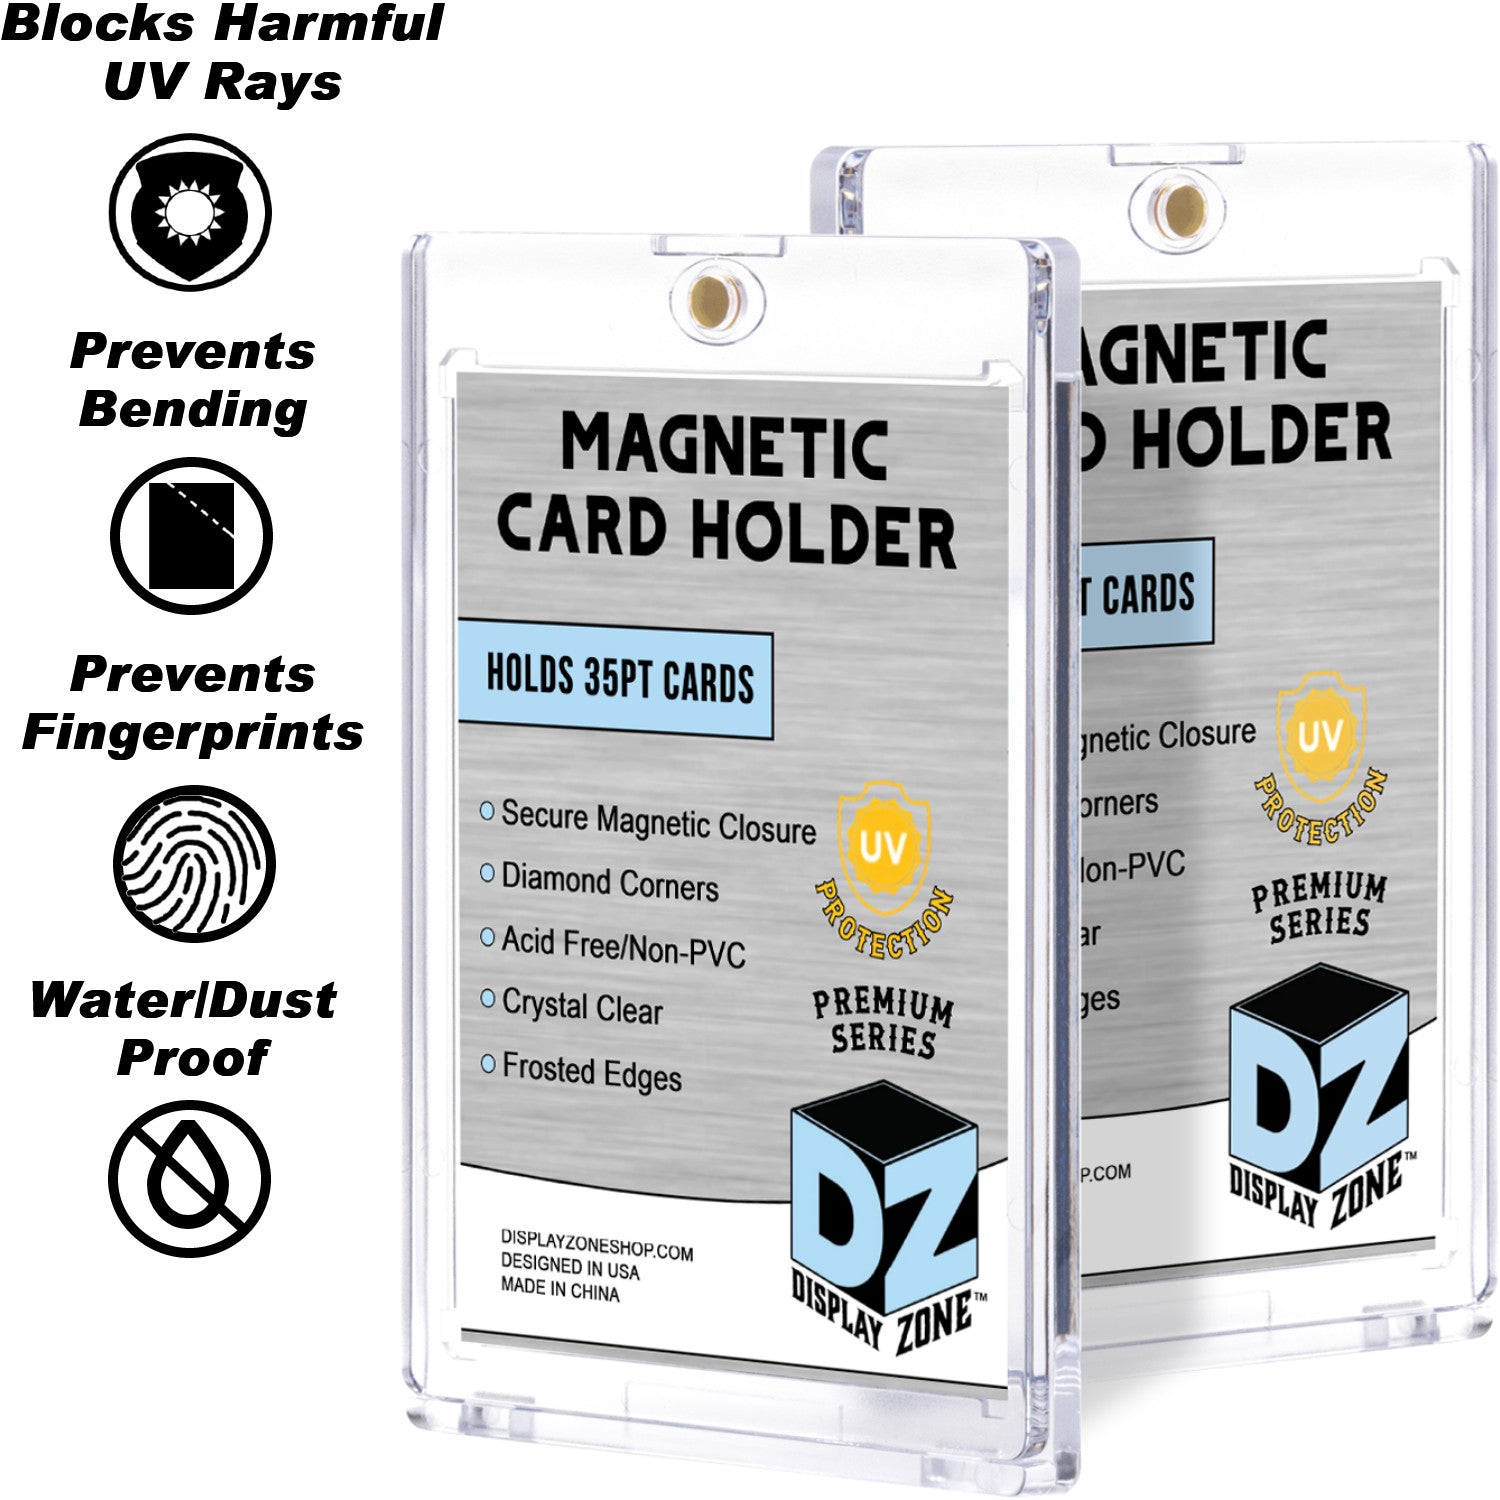 Magnetic One-Touch Trading Card Holder 35pt (Box 25) - Display Zone